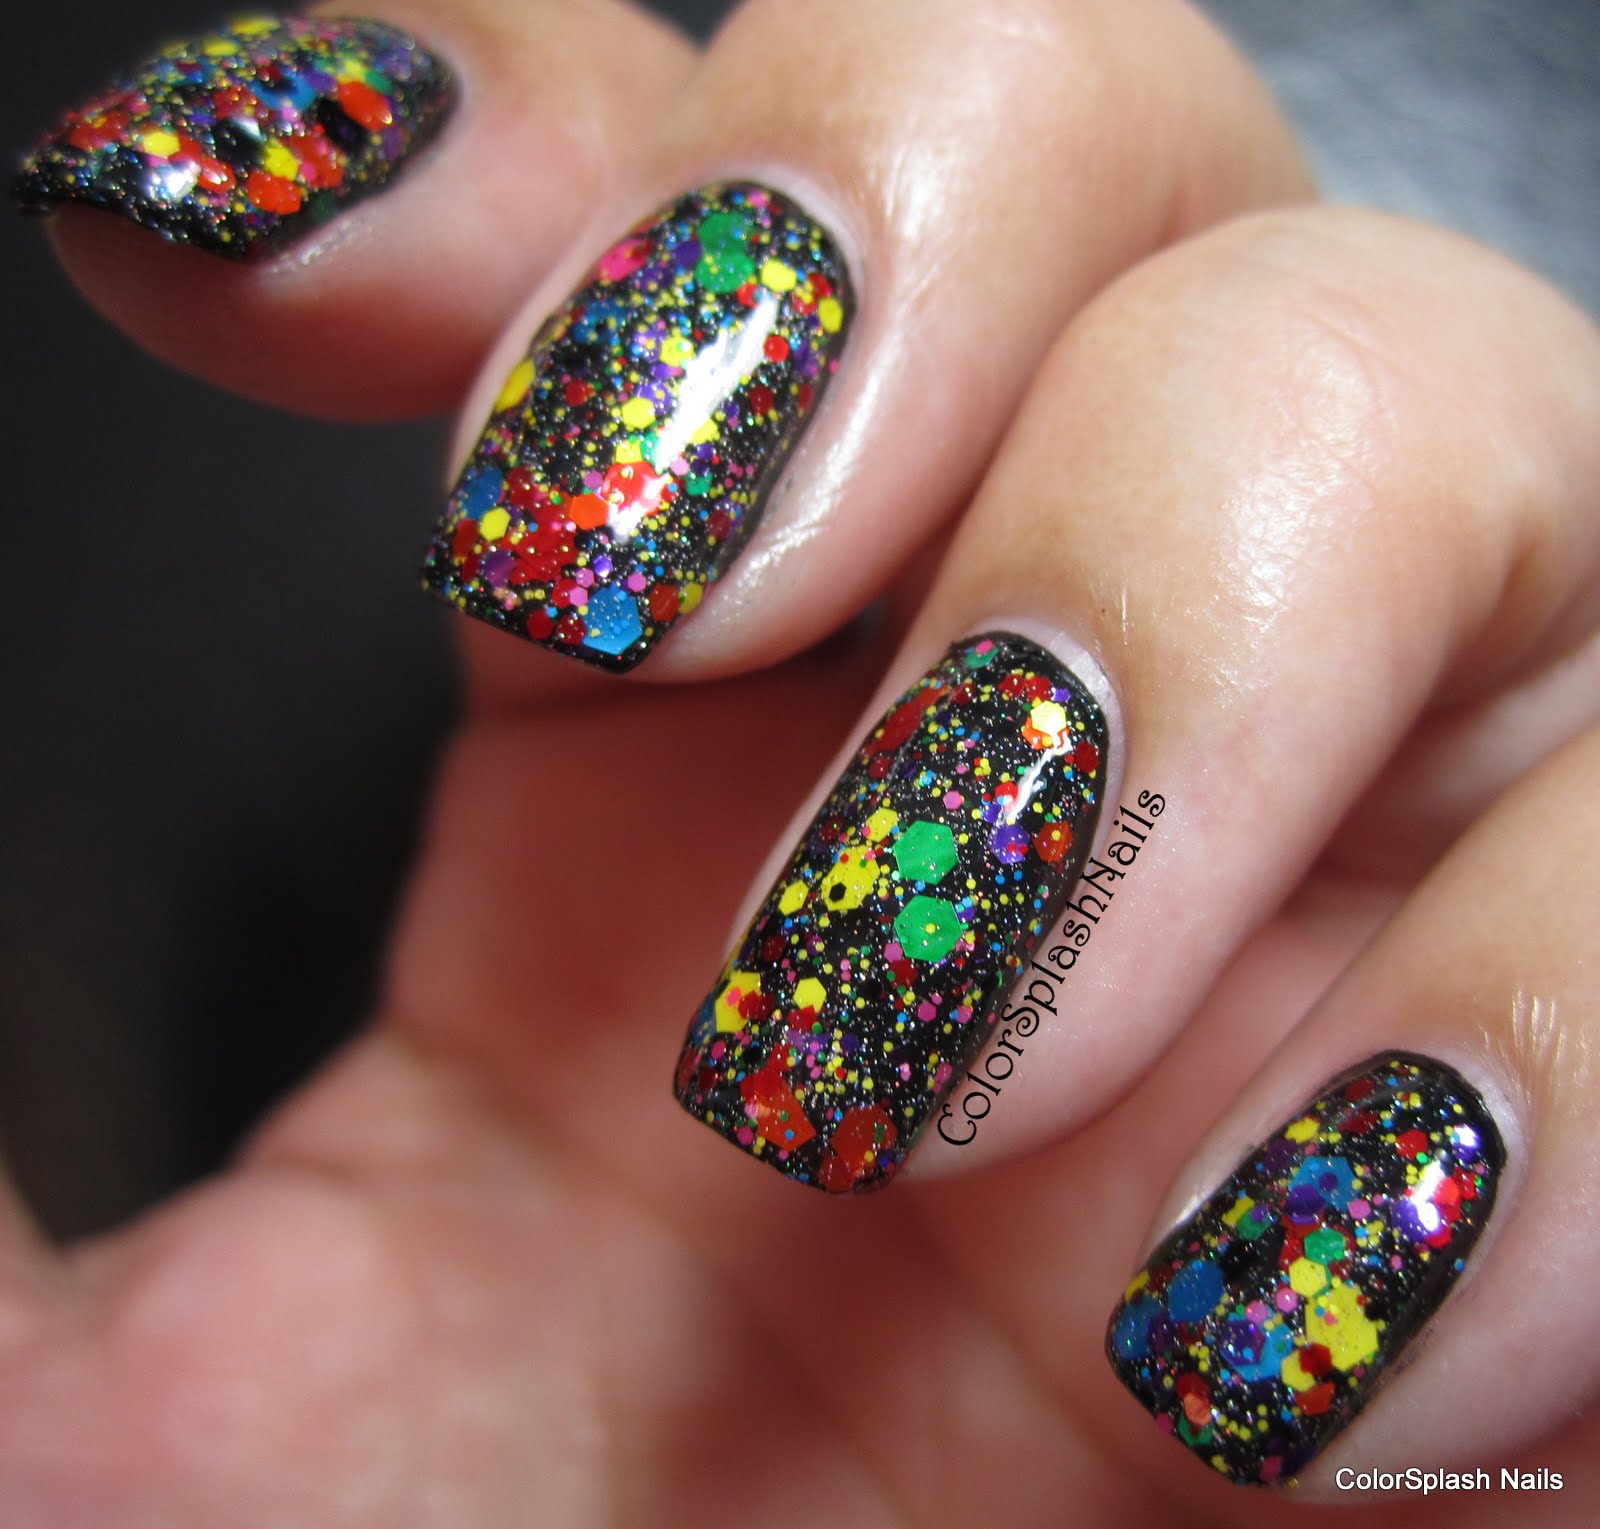 Colorsplash Nails: Liquid Sky Lacquer Halloween Collection